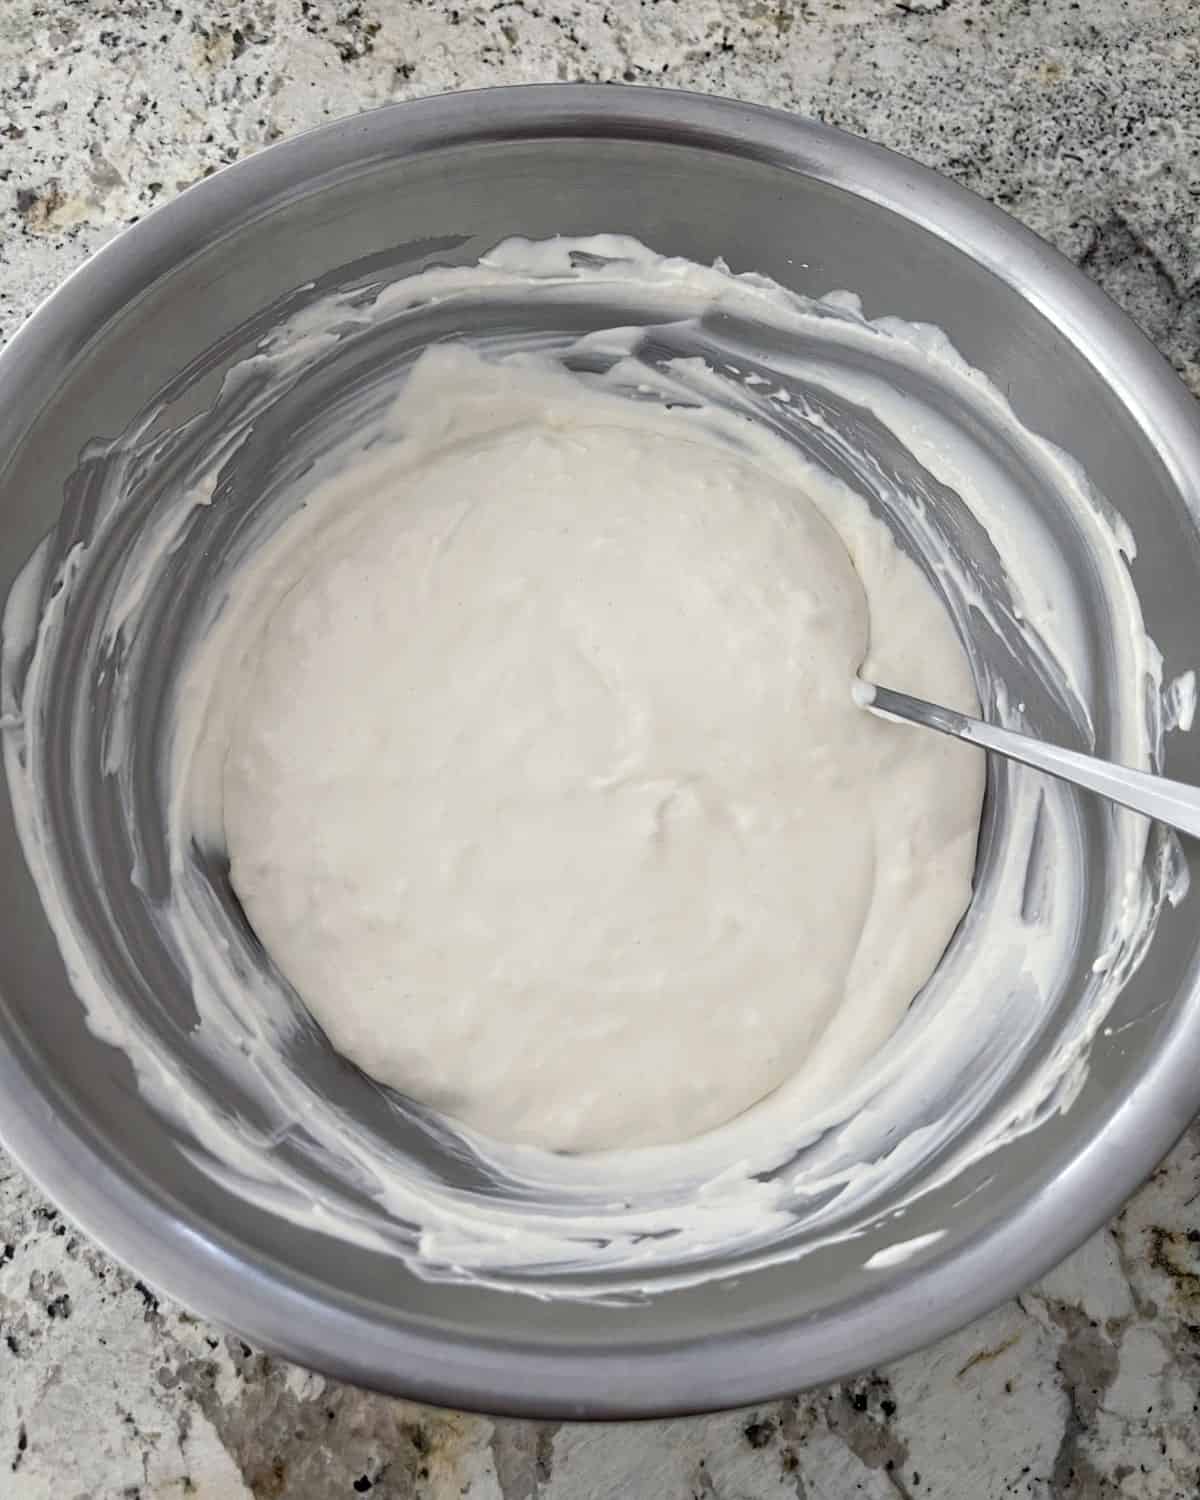 Stirring no-bake cheesecake dessert in mixing bowl with spoon.